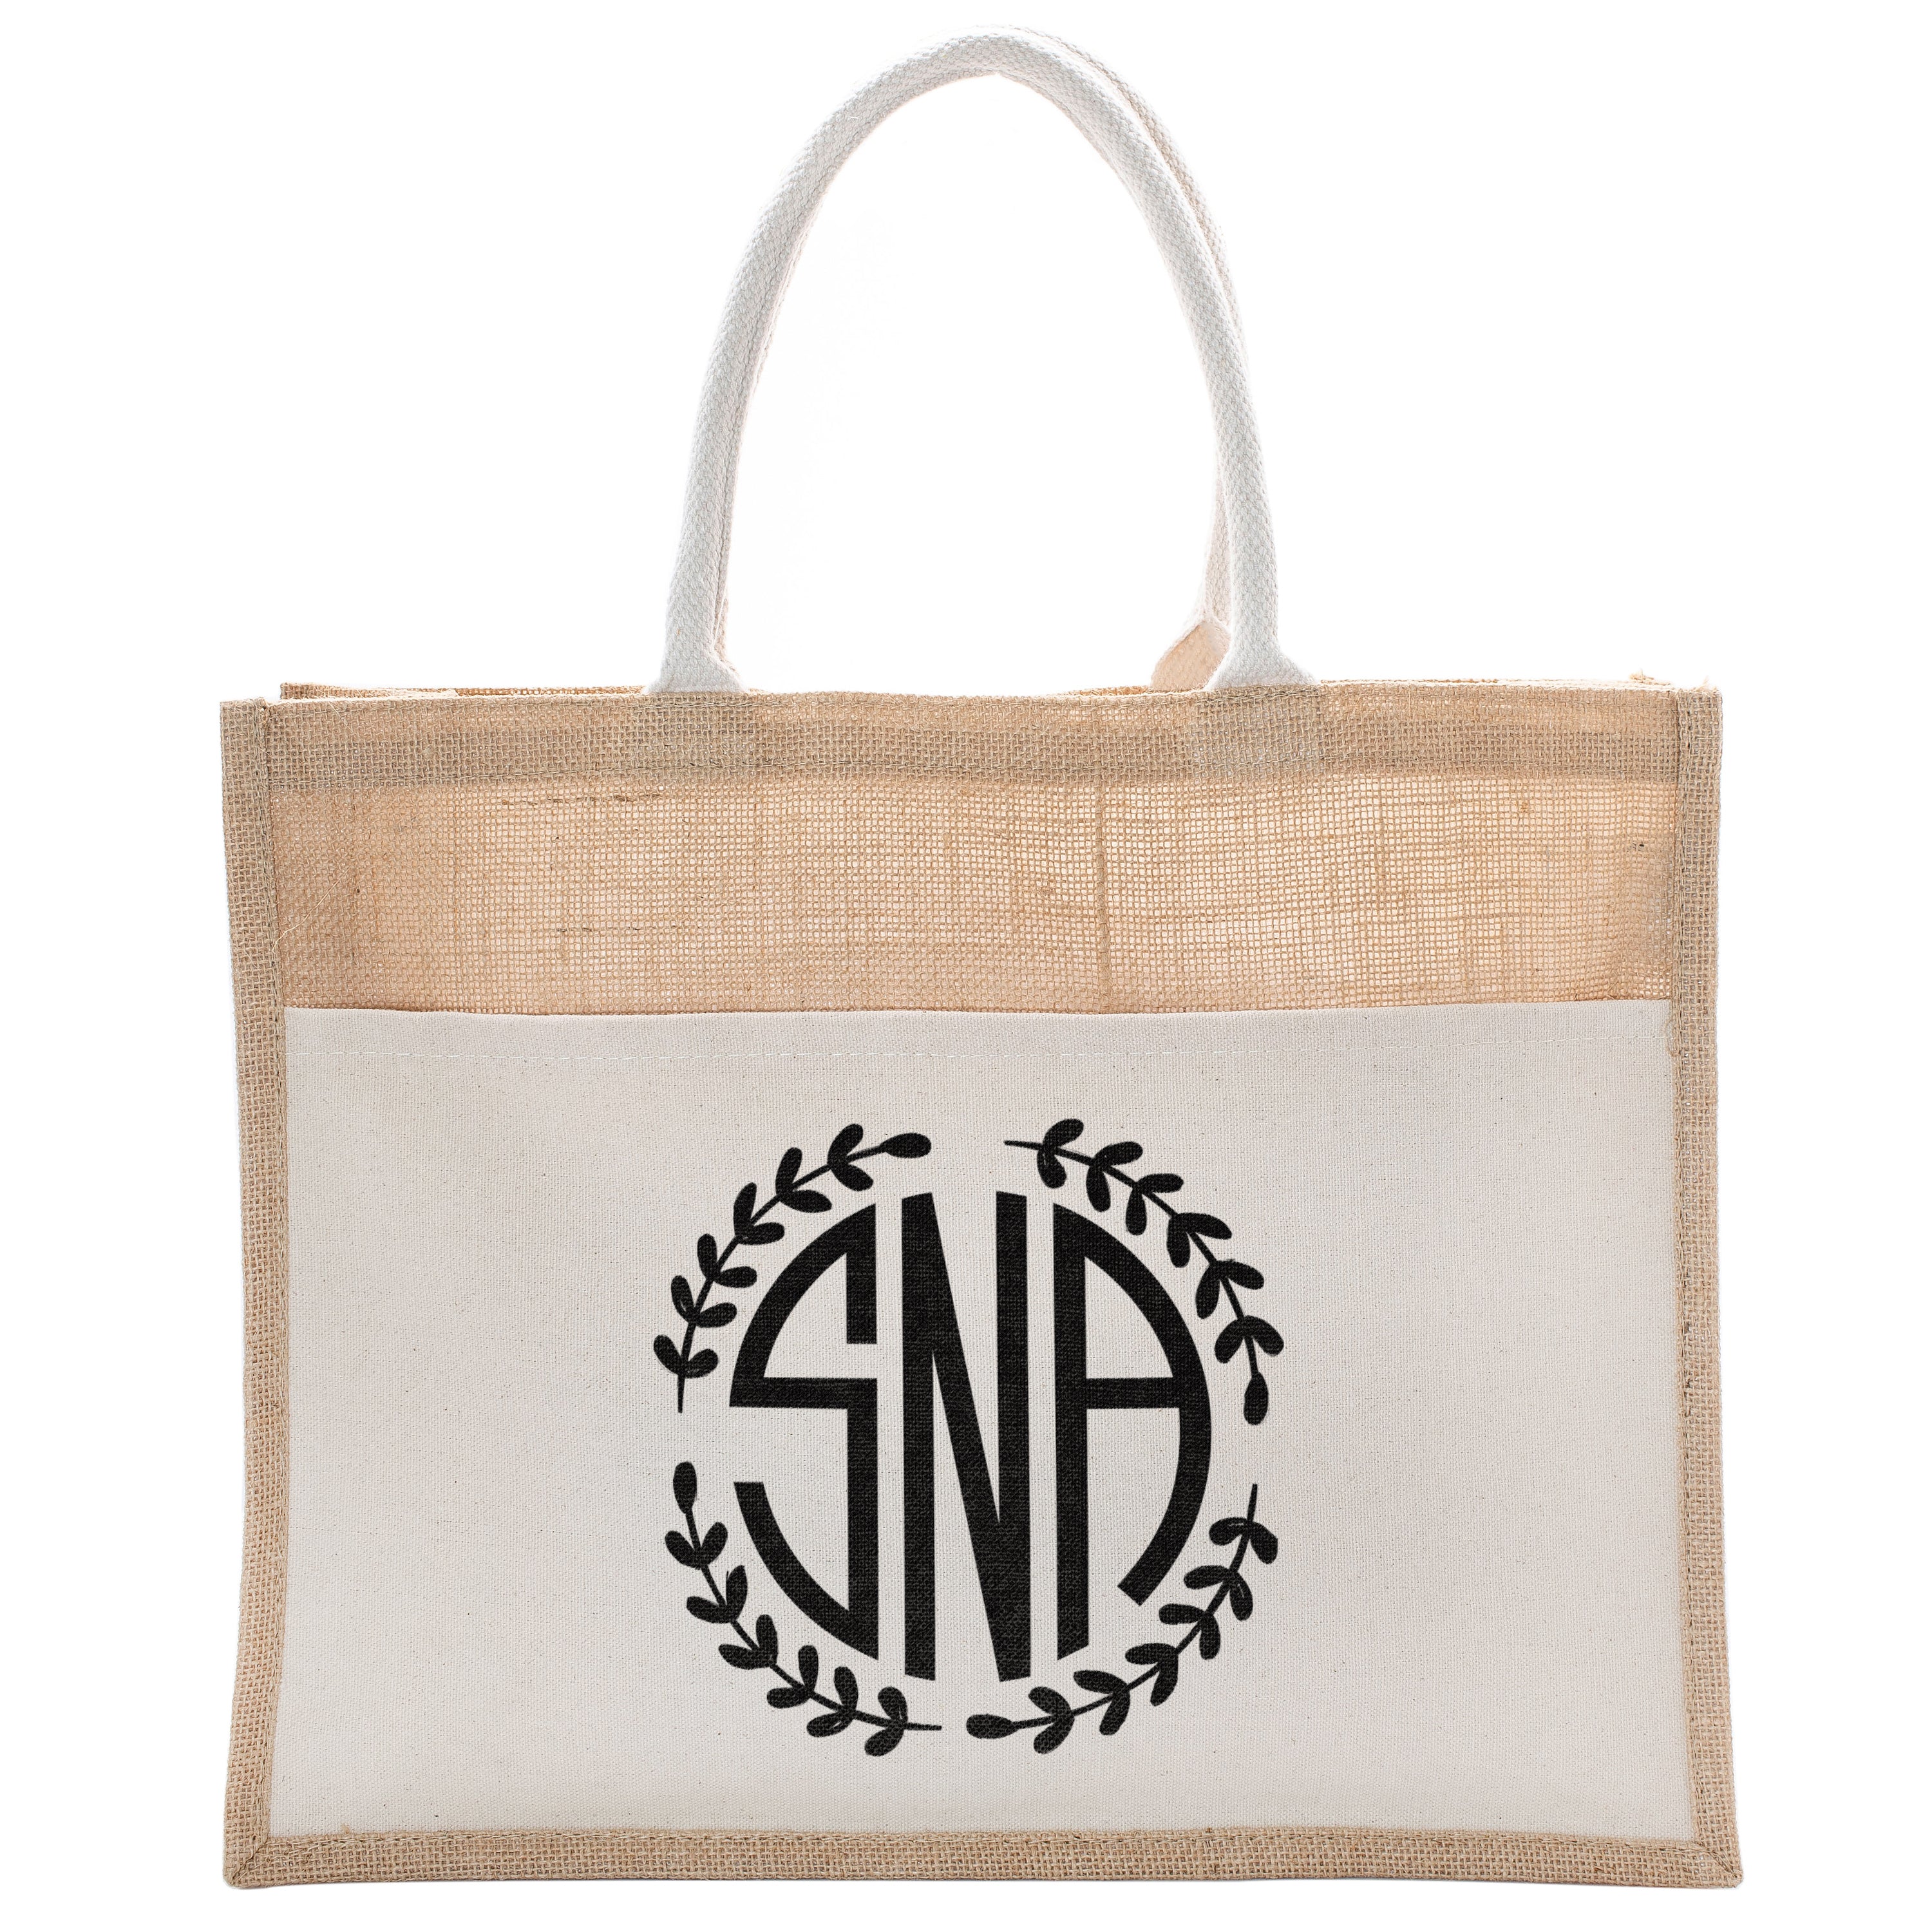 Personalized Monogram Tote Bag  Initial Luxury Totes for Beach